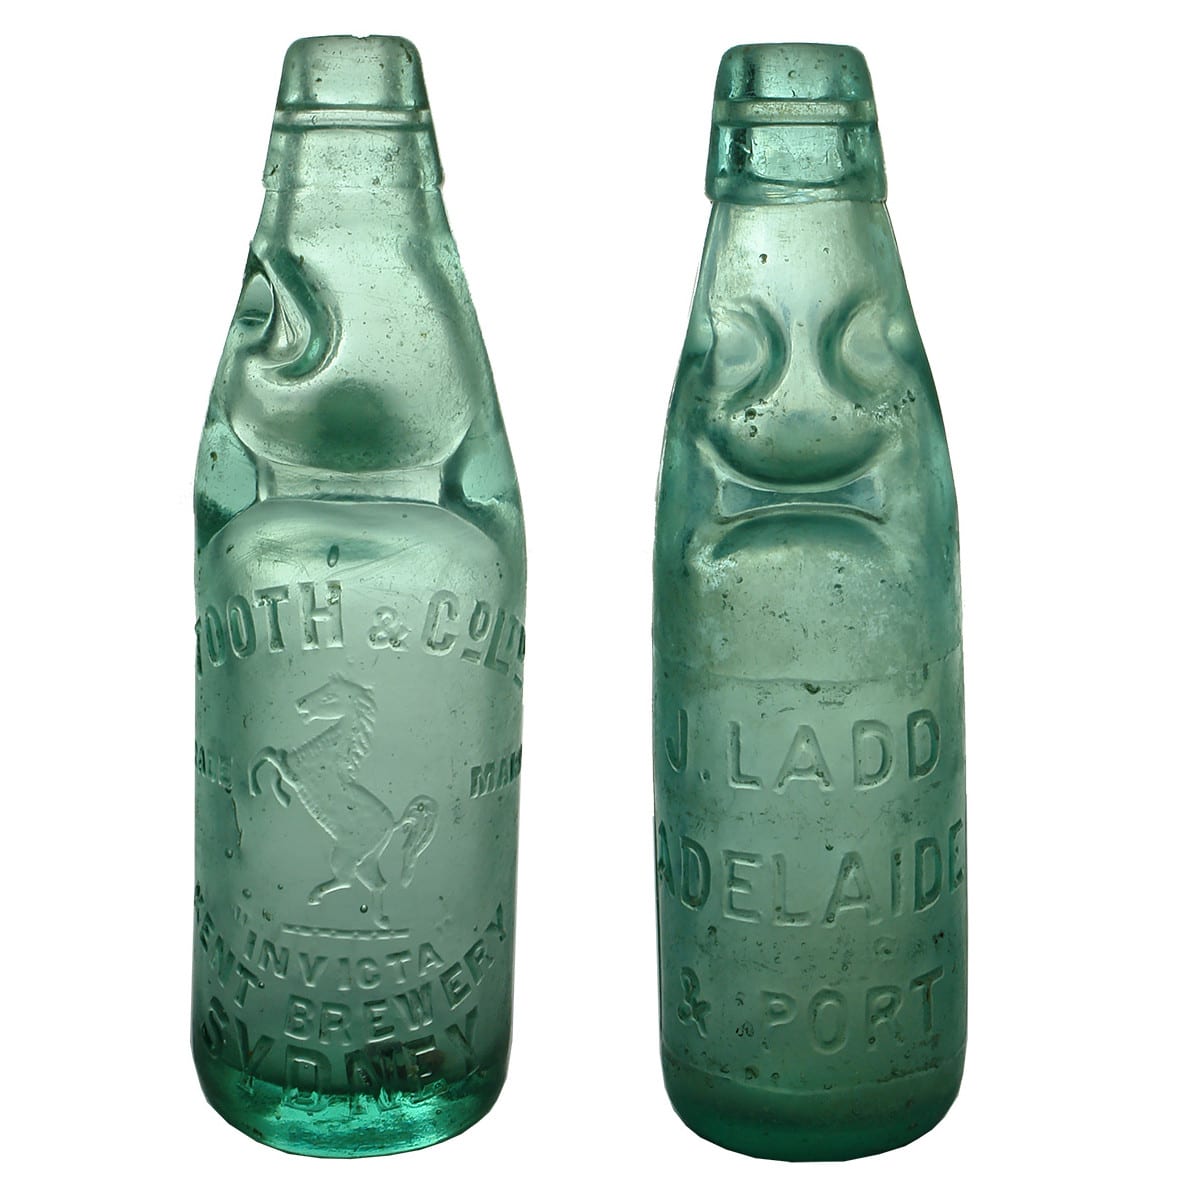 Pair of Codds: Tooth & Co Ltd, Sydney and J. Ladd, Adelaide & Port. (New South Wales & South Australia)